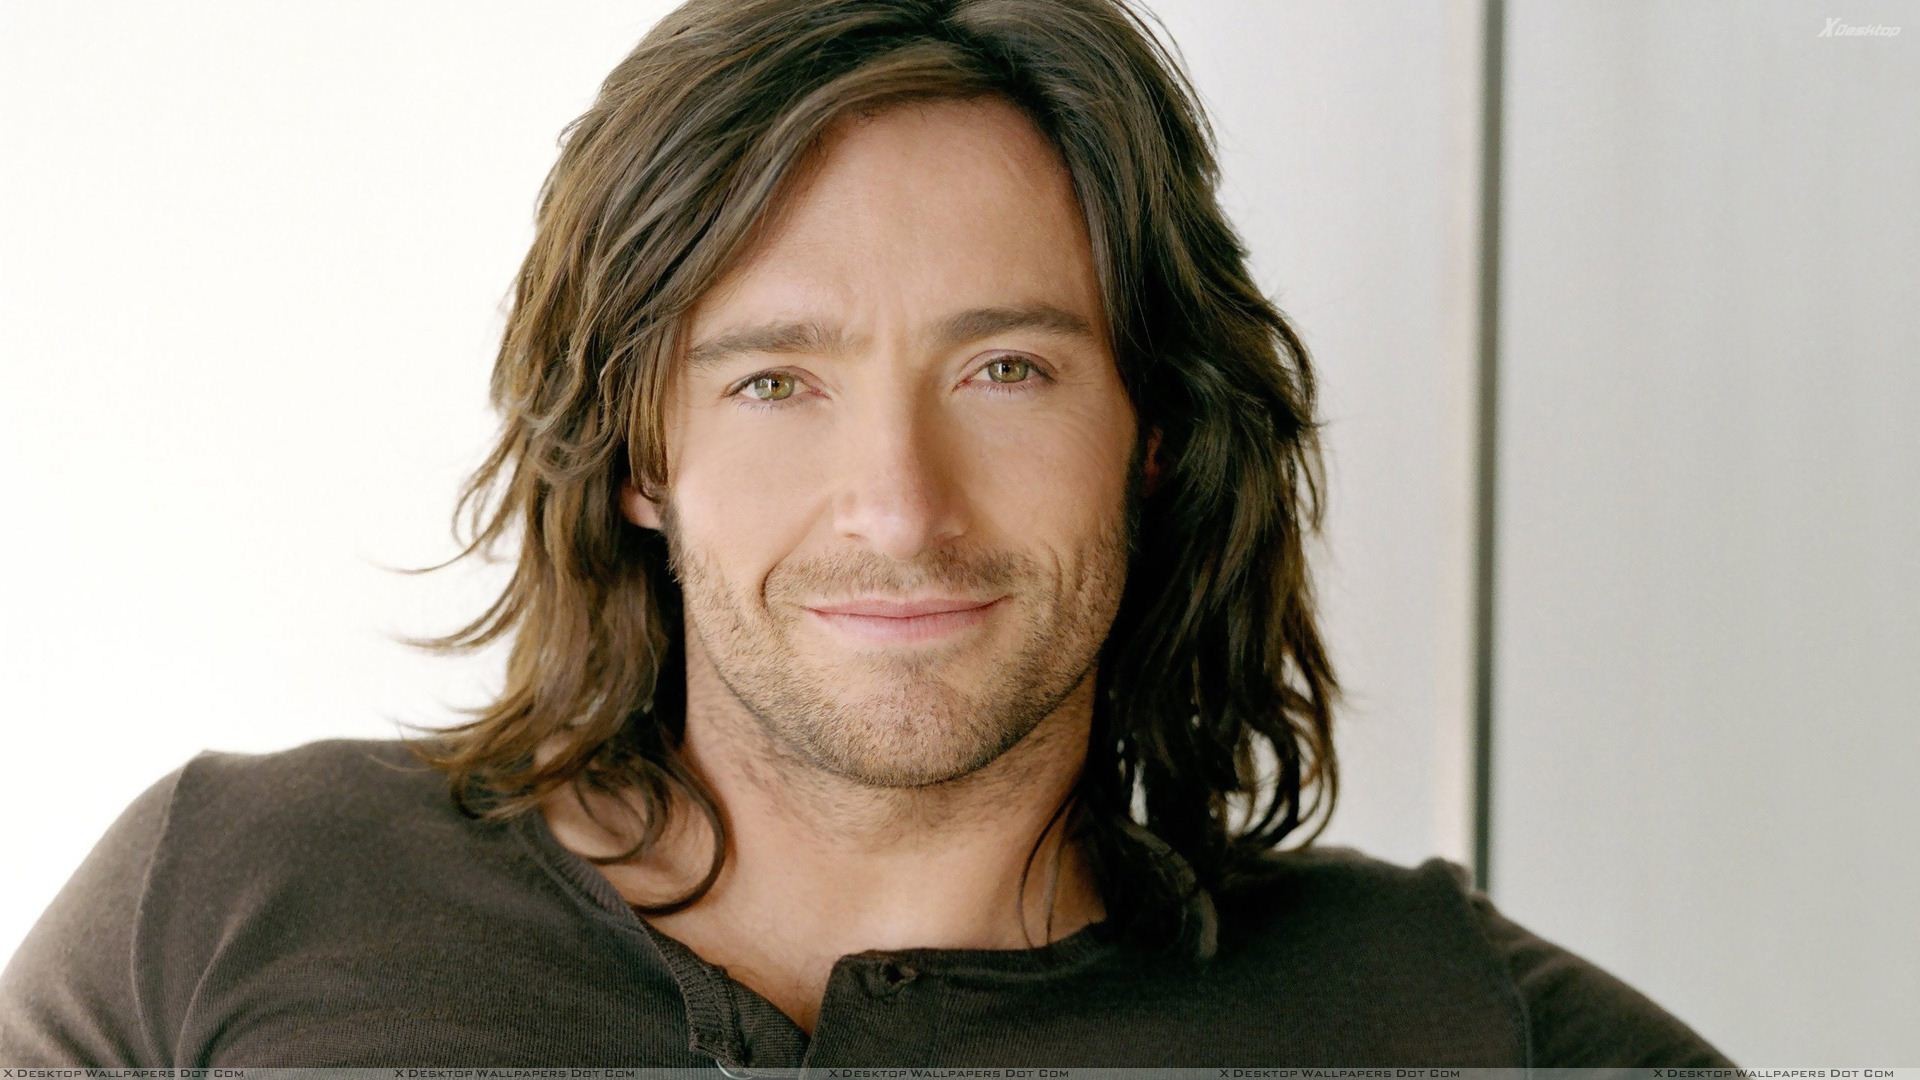 1920x1080, You Are Viewing Wallpaper Titled Hugh Jackman - Long Hair Hugh Jackman - HD Wallpaper 